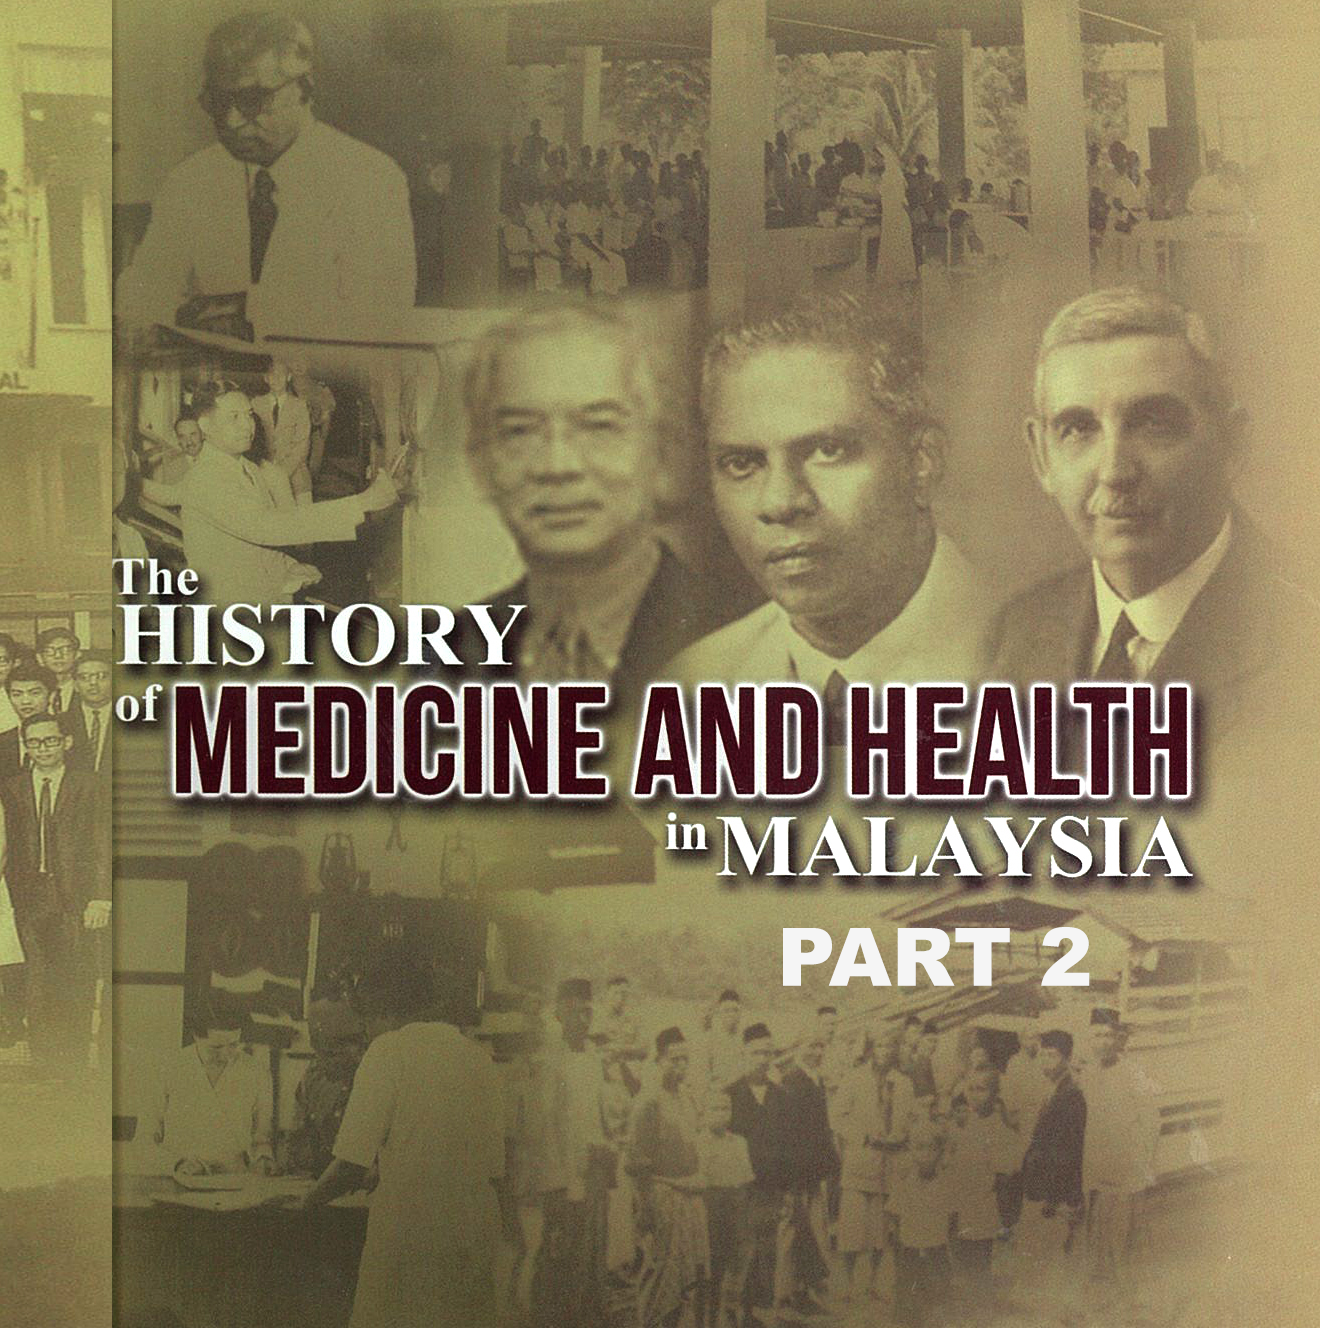 The History of Medicine in Malaysia (Part 2)